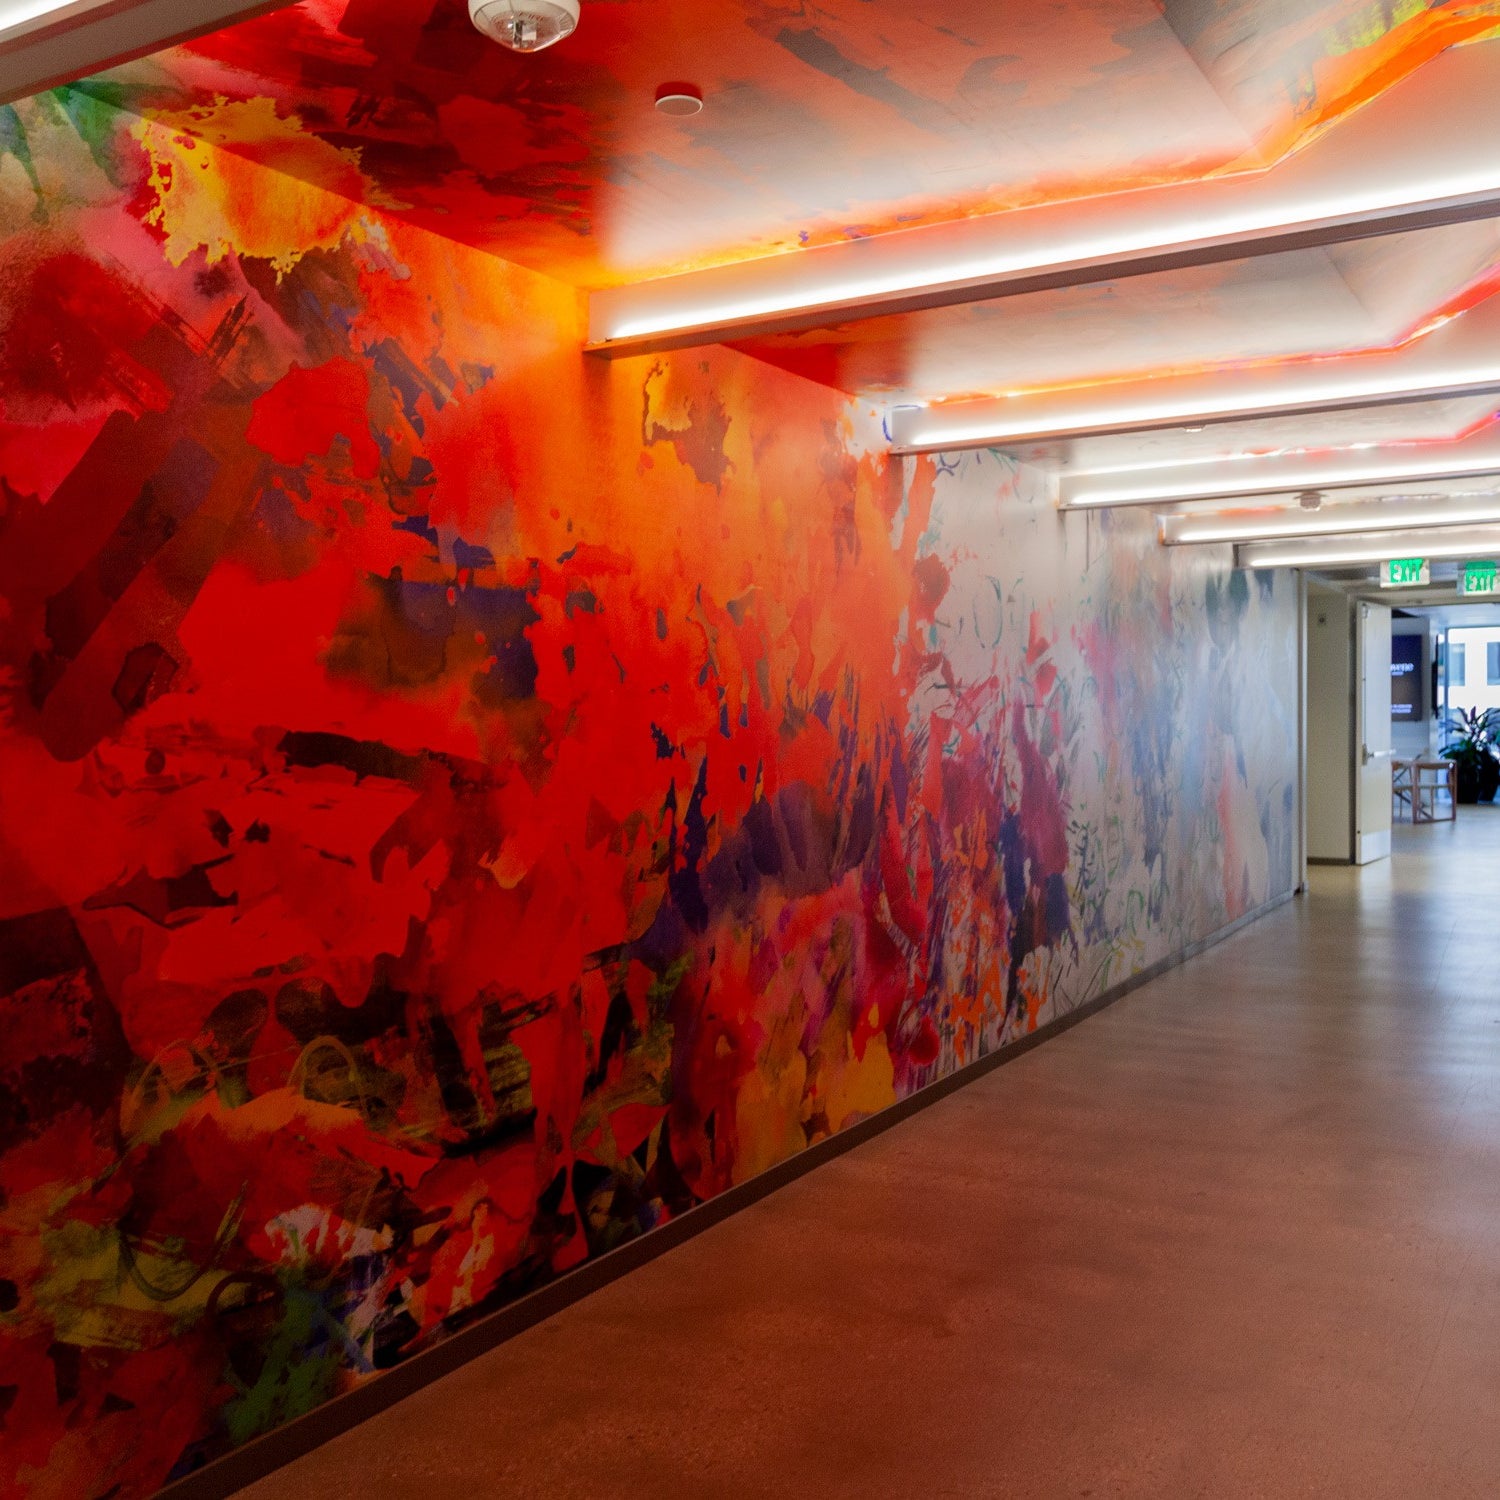 Corridor in Convene DTLA illuminated by a rich, red-toned abstract mural along the wall, enhancing the passageway with a bold artistic expression.